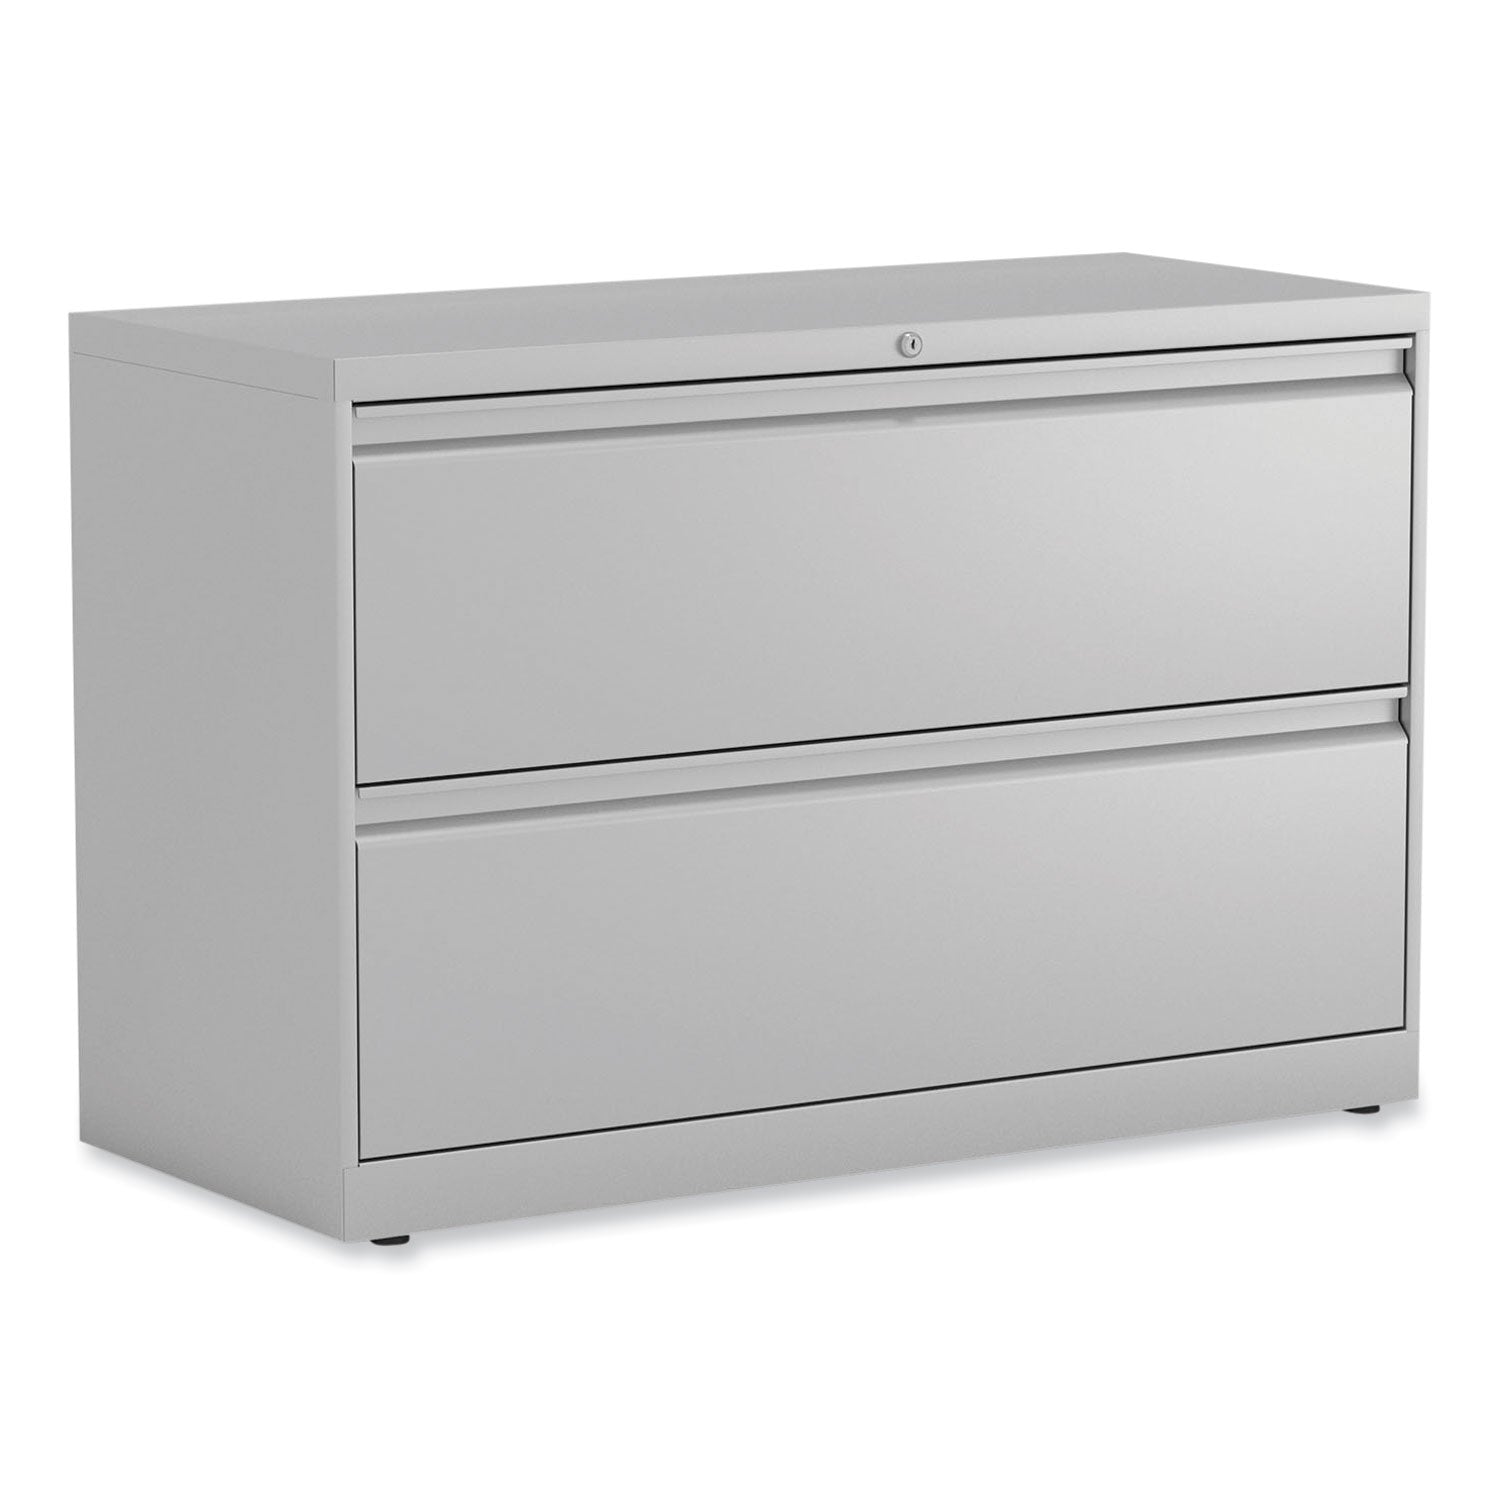 lateral-file-2-legal-letter-size-file-drawers-light-gray-42-x-1863-x-28_alehlf4229lg - 1